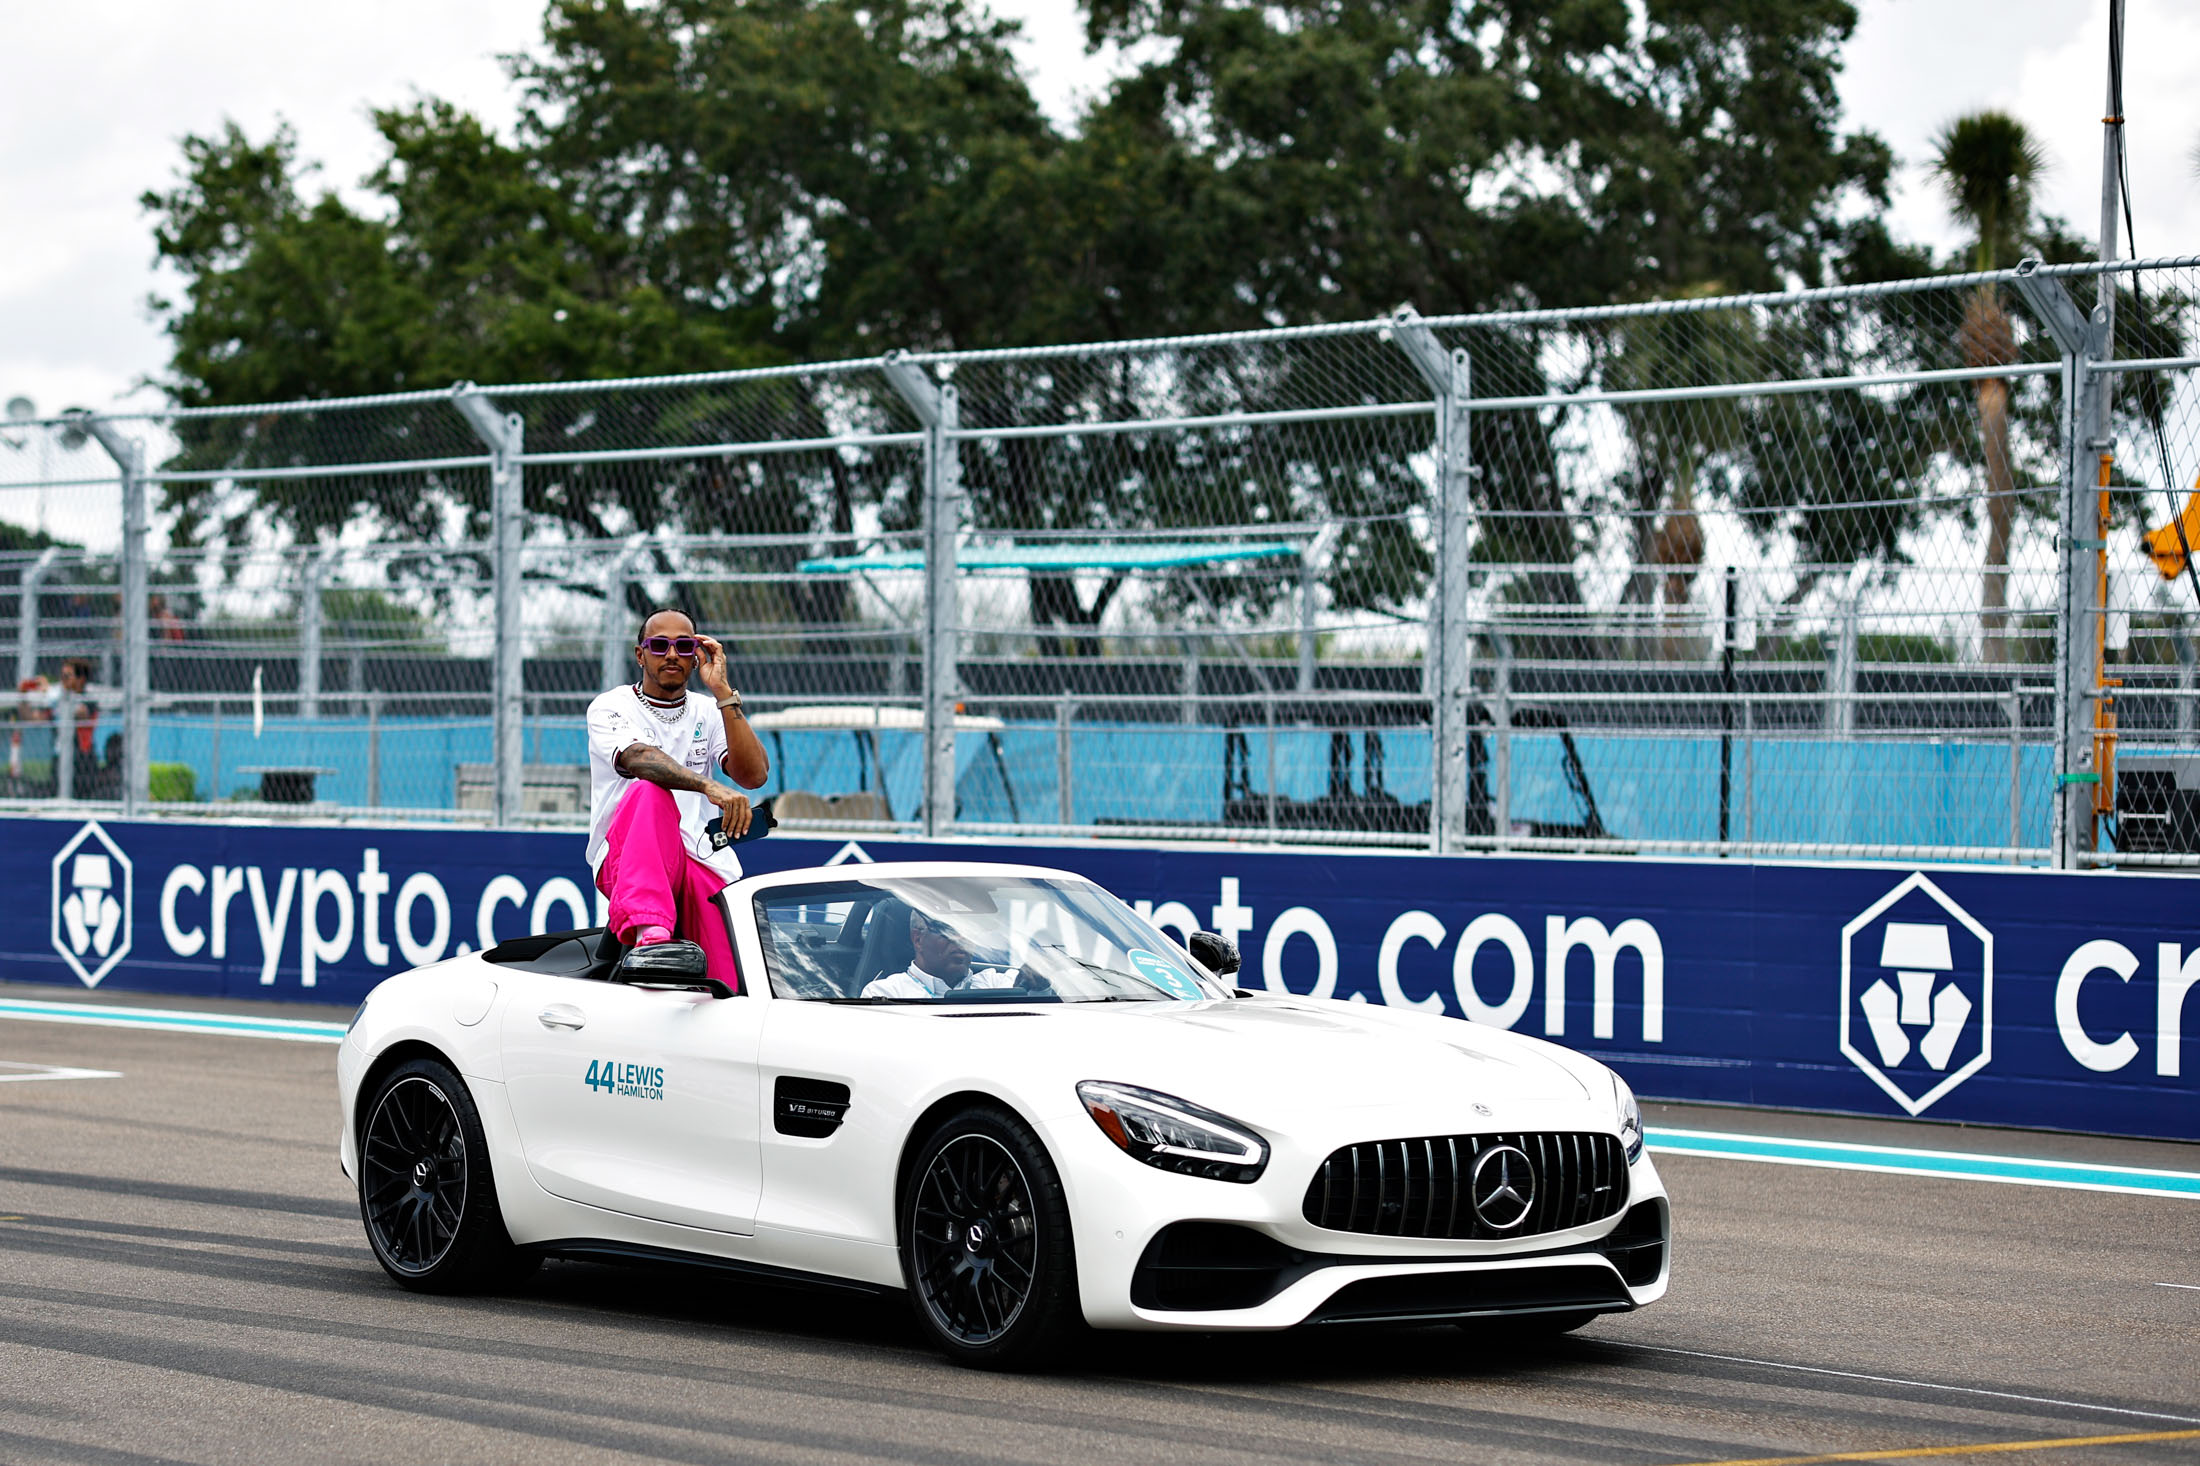 Miami Grand Prix: Fake Marina With Fake Water Steals Show - Bloomberg